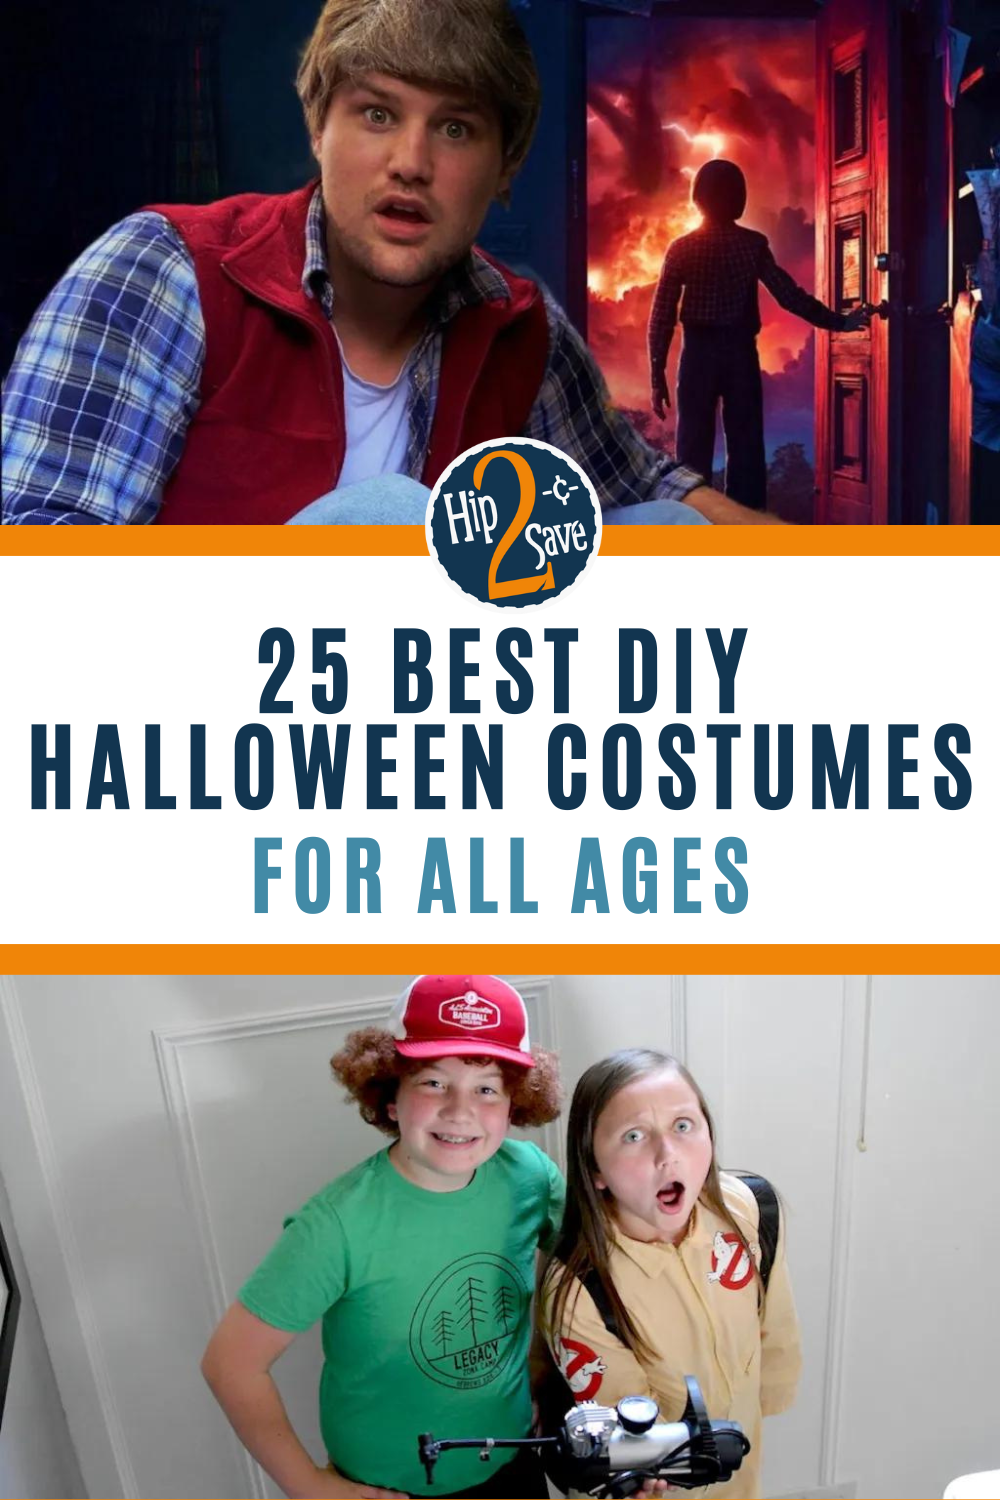 25 Best DIY Halloween Costumes for Kids & Adults | Easy & Clever Ideas!